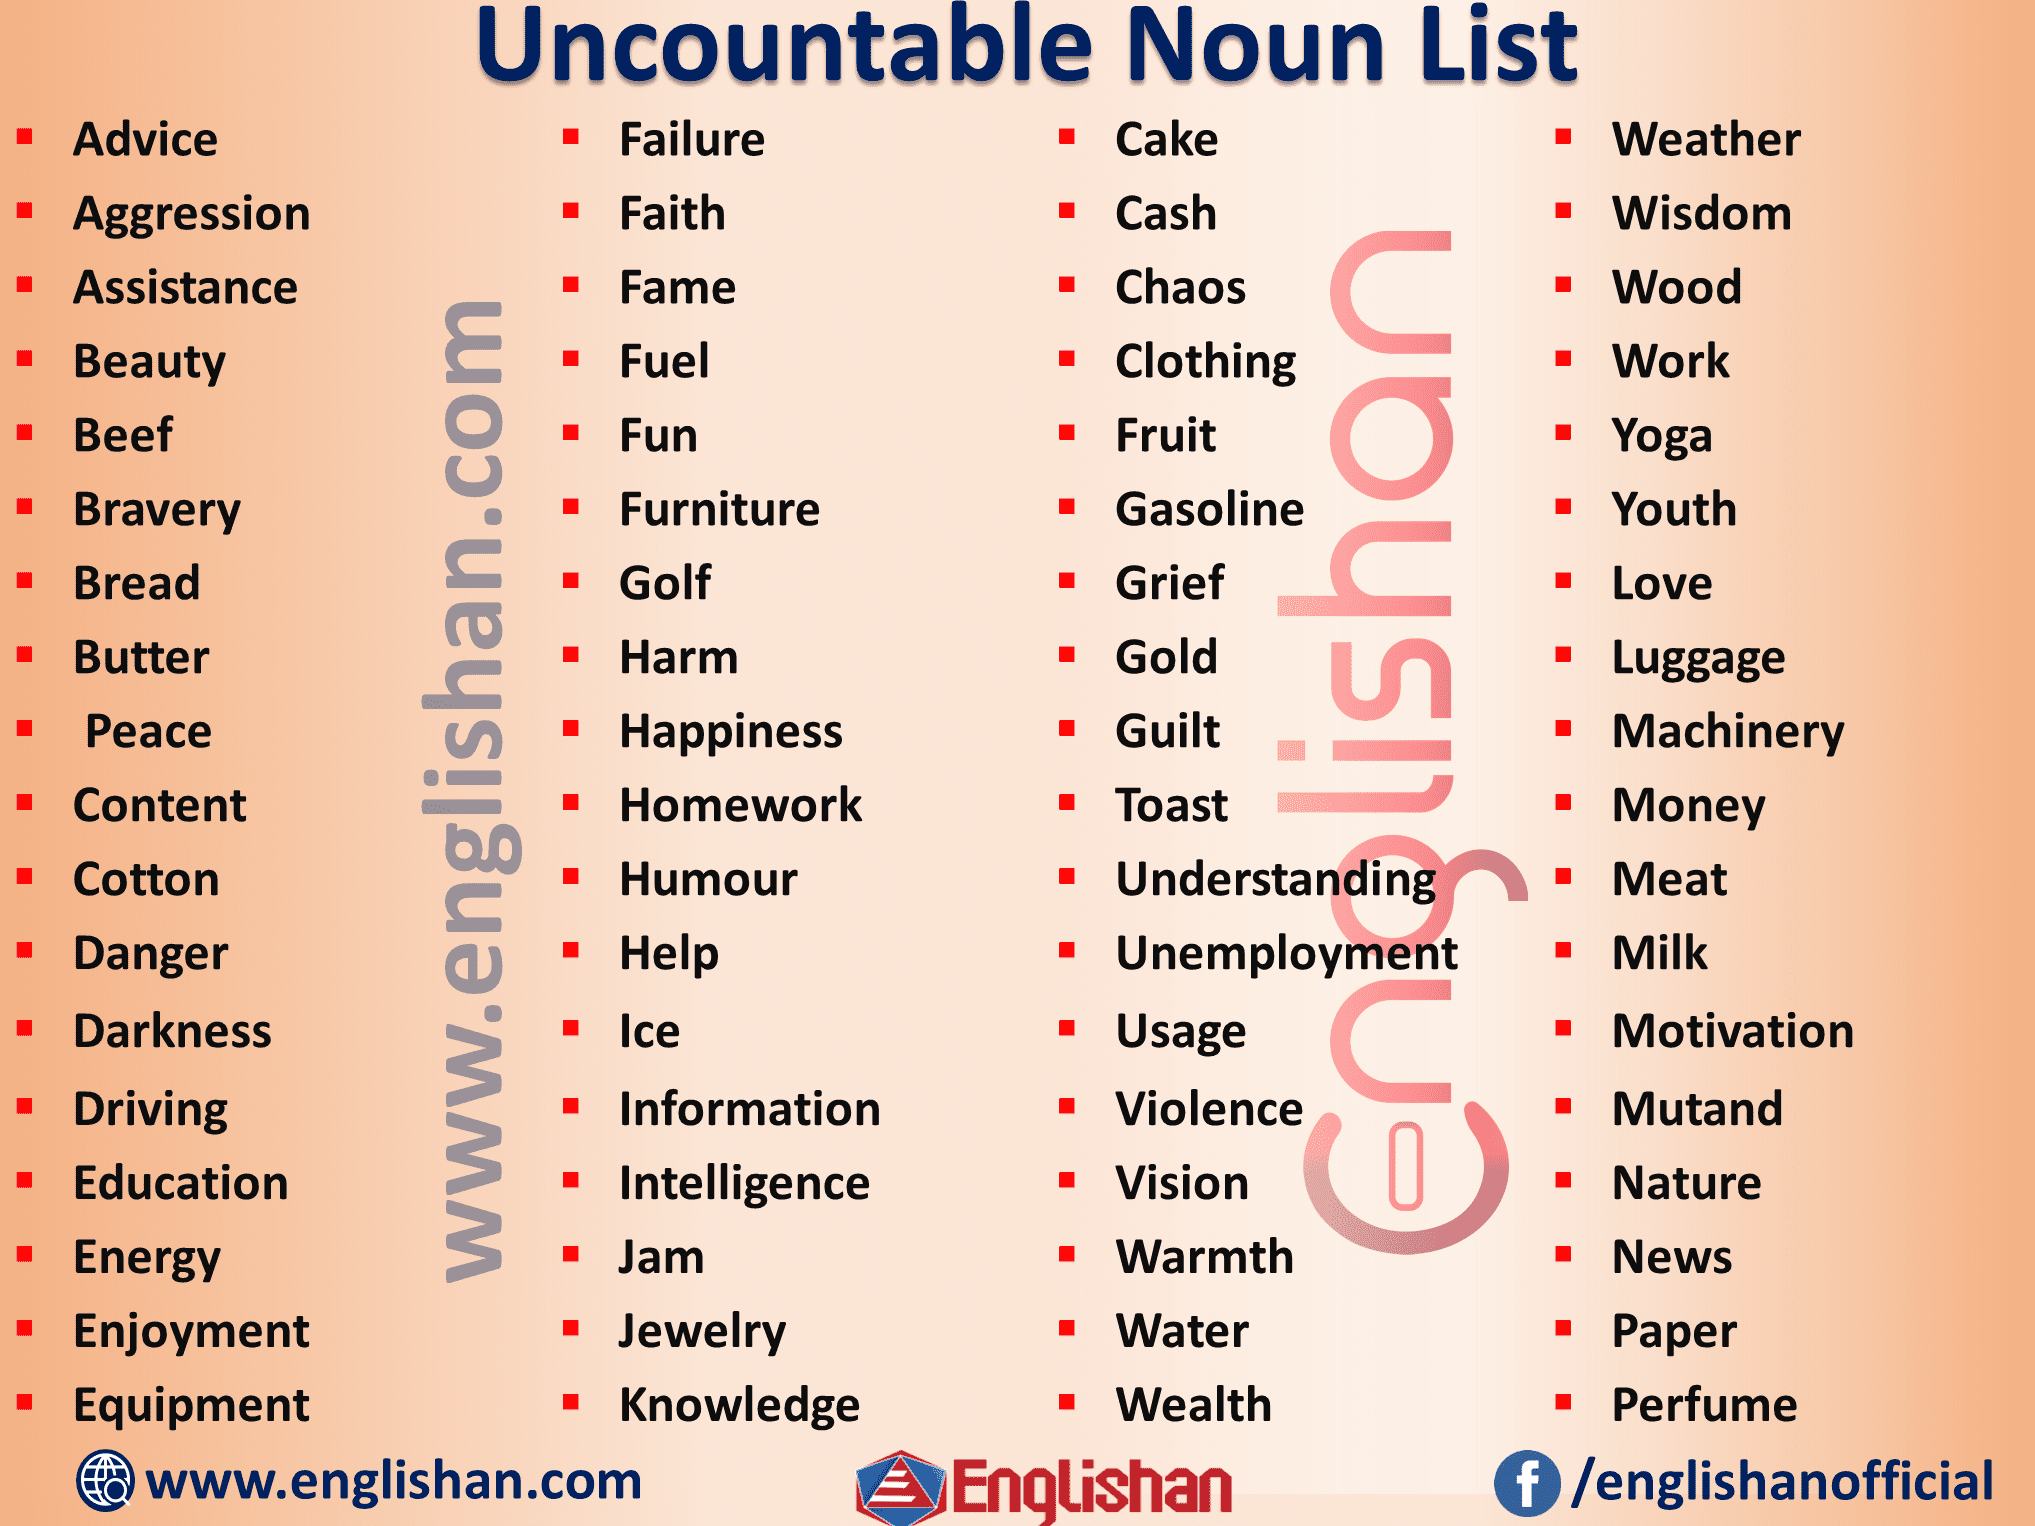 Countable and Uncountable nouns with their Rules | Englishan